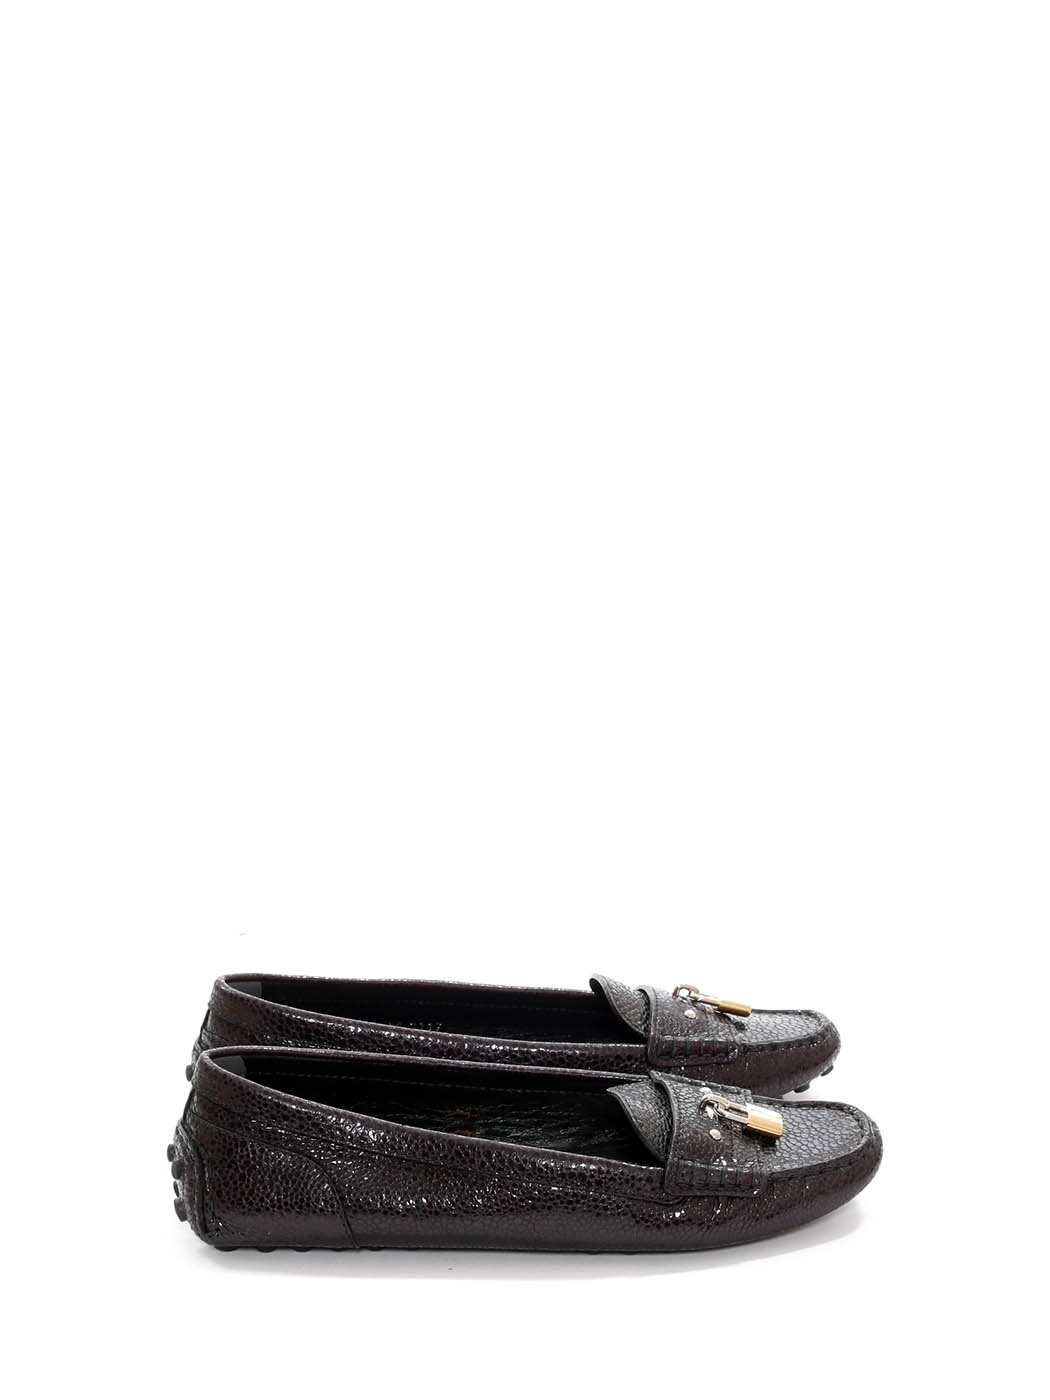 Boutique LOUIS VUITTON Padlock black shiny leather loafers with gold and silver Retail €550 Size